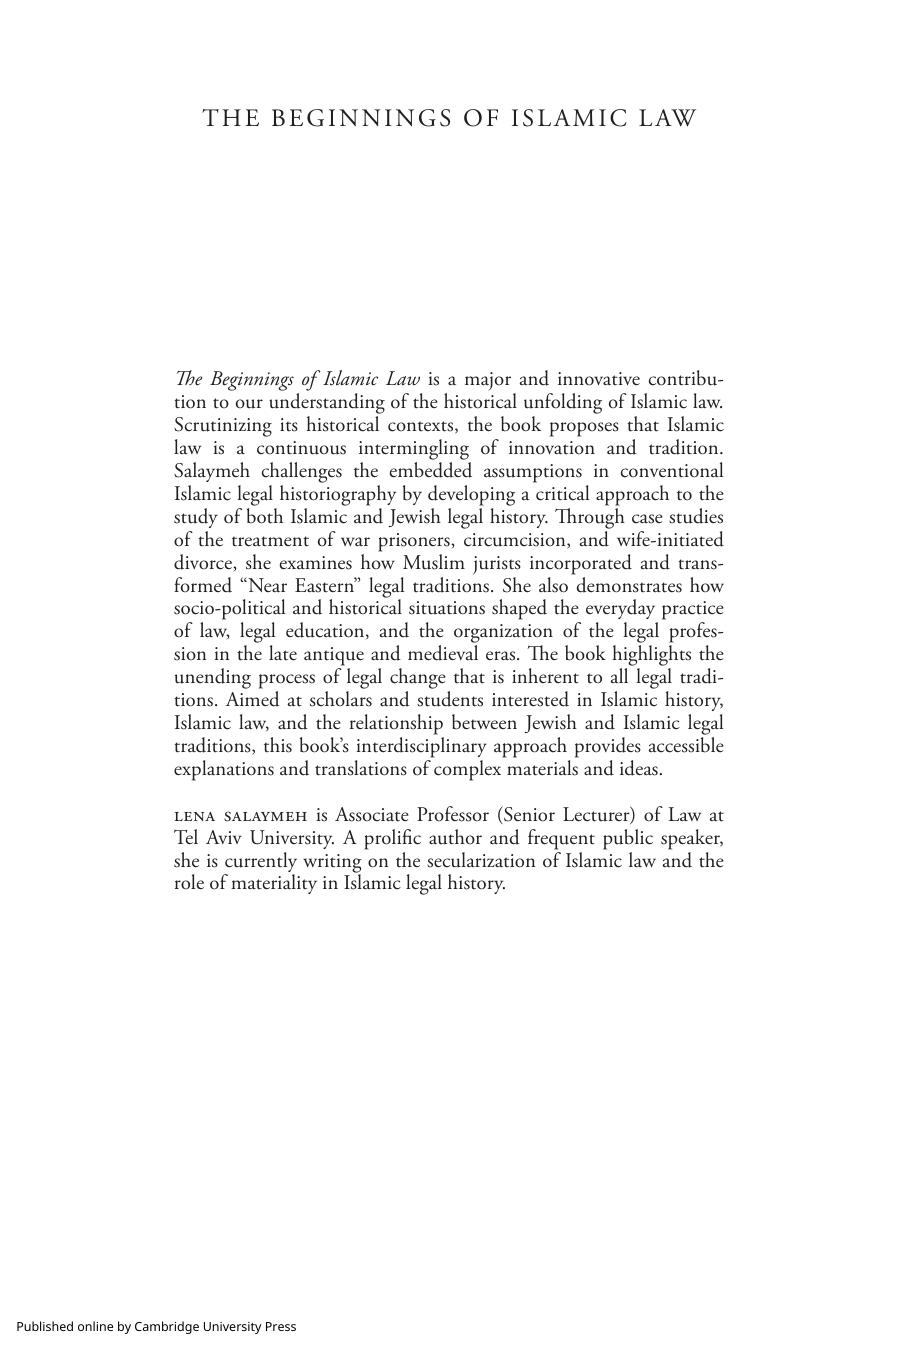 The Beginnings of Islamic Law: Late Antique Islamicate Legal Traditions by Lena Salaymeh